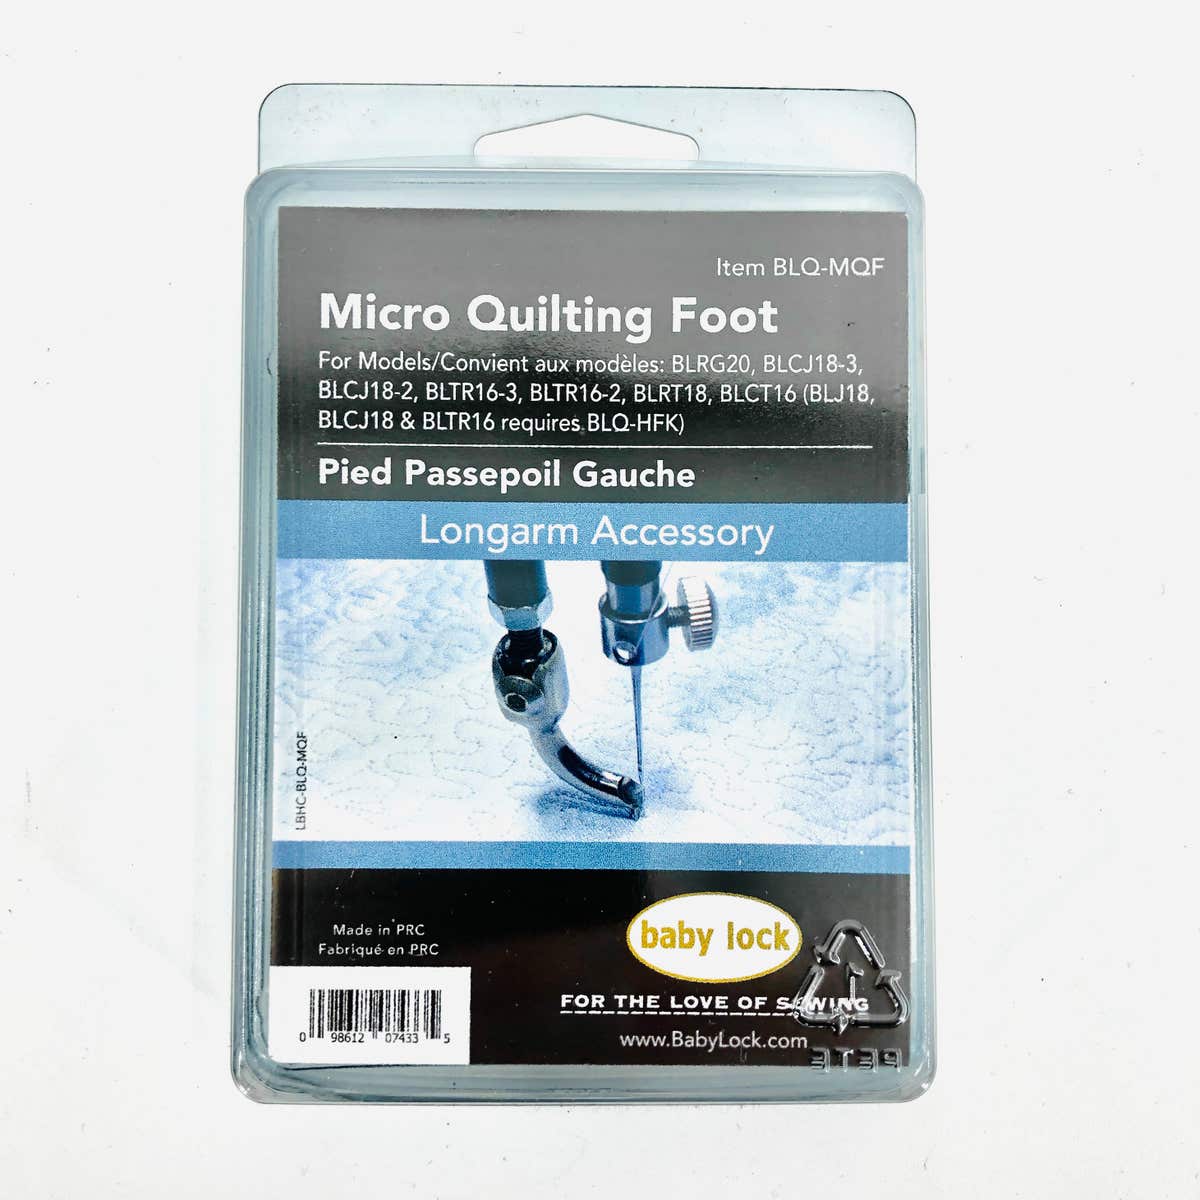 Micro Quilting Foot, Baby Lock